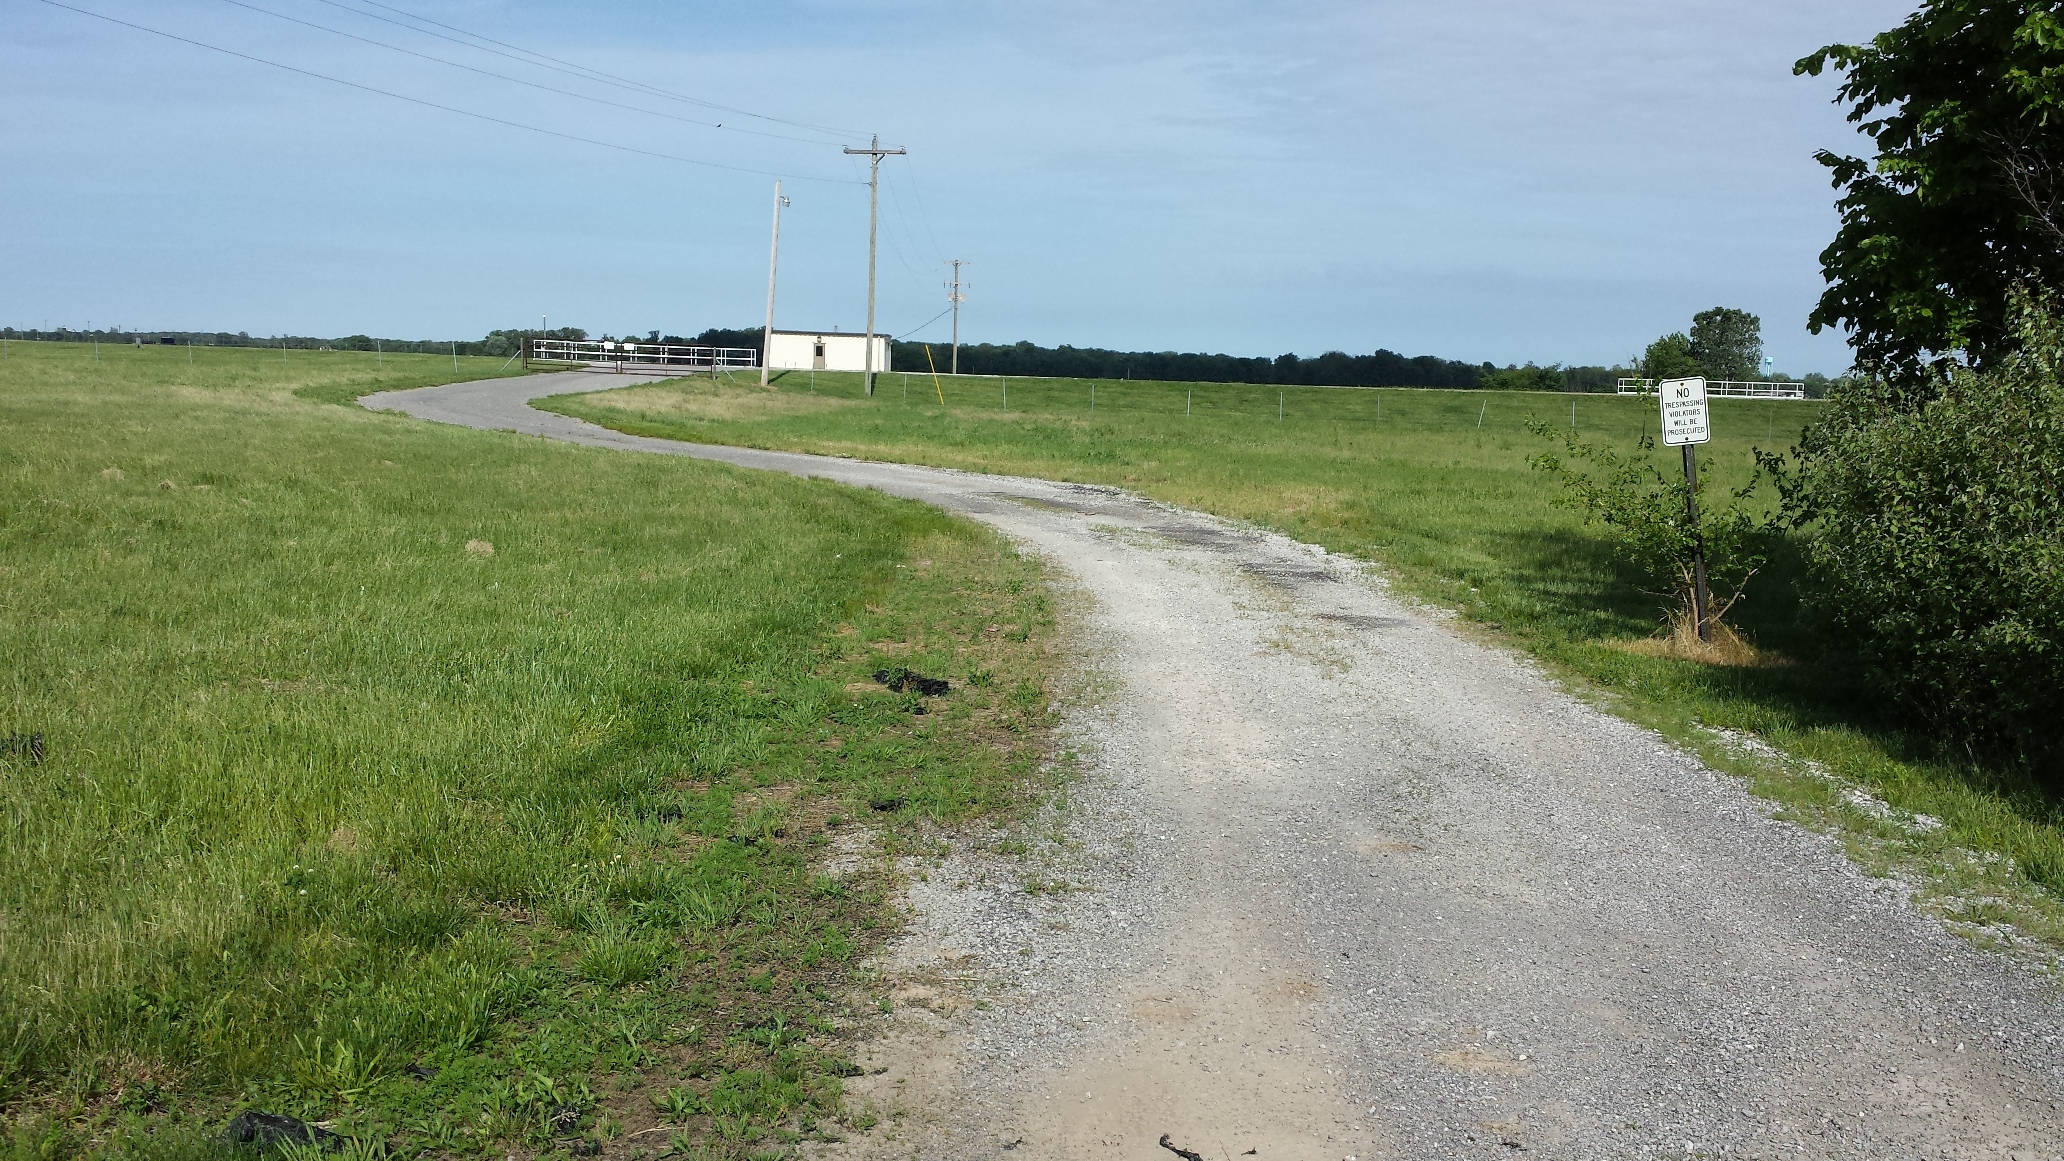 Photograph of the former site of the Nike base in 2015, having become a sewage treatment facility for Marine